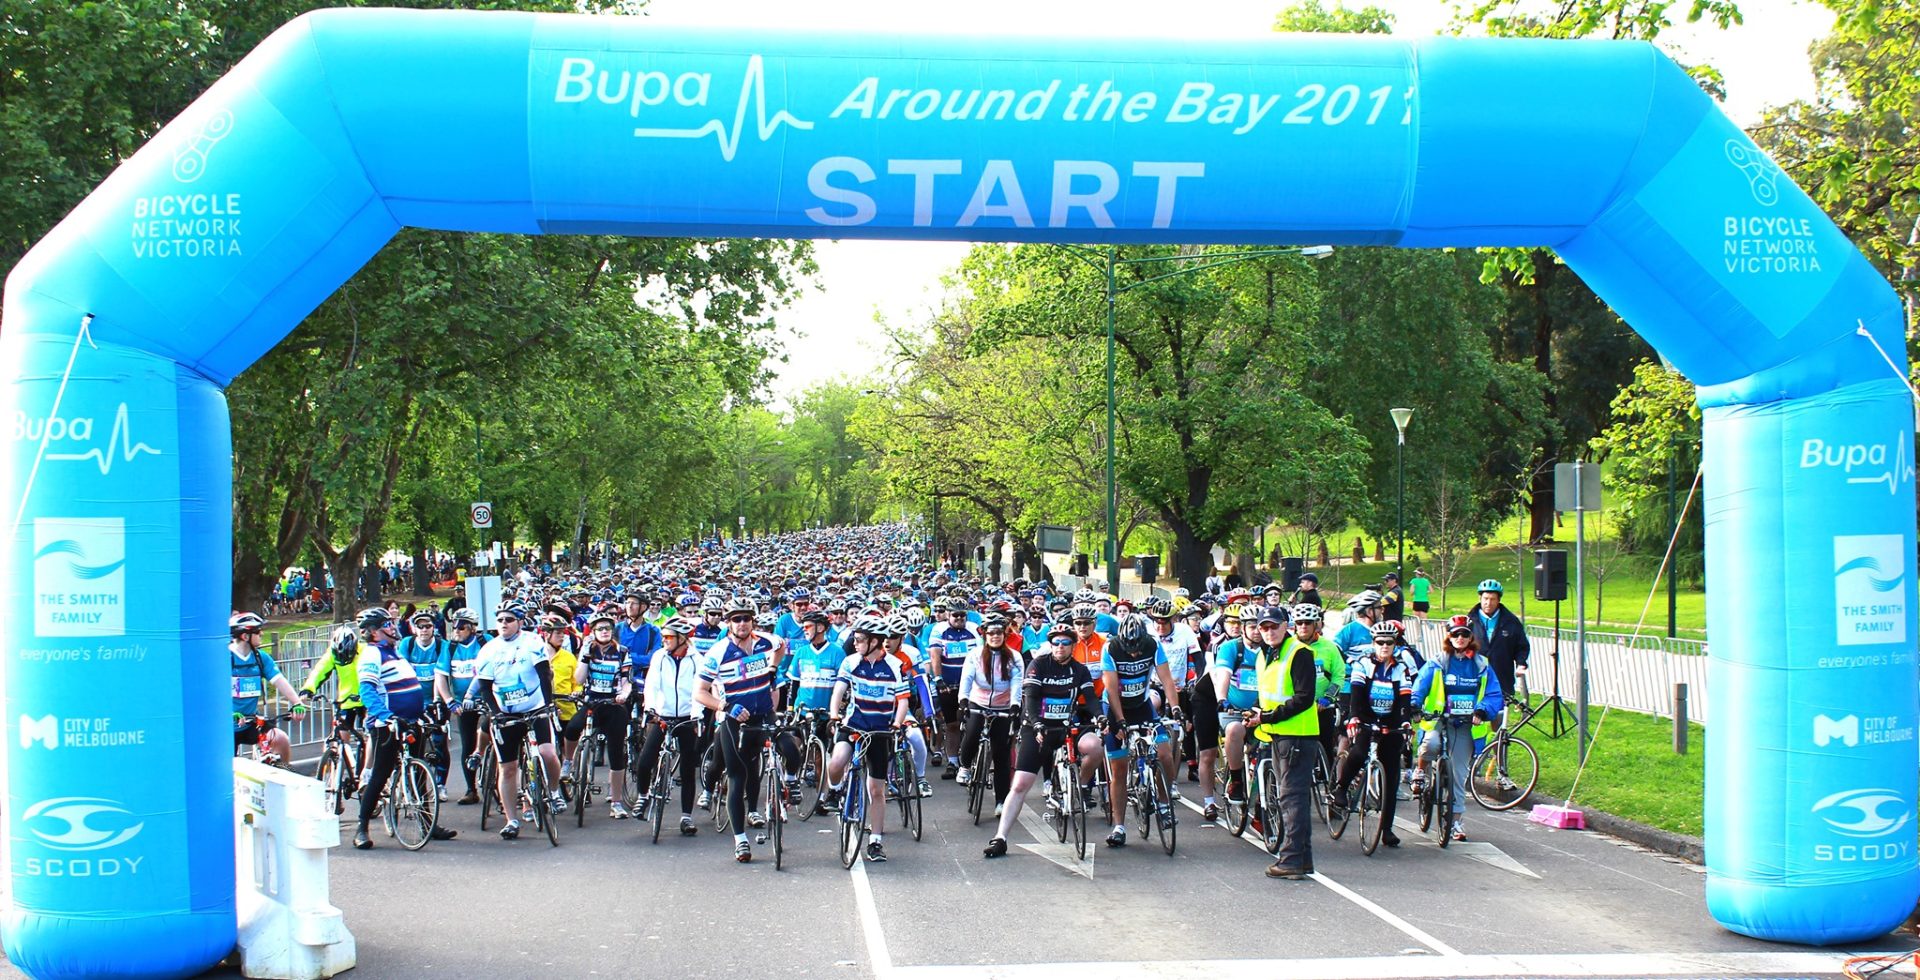 A mass of cyclists await the start of the 2011 Around the Bay under a blue event gantry bearing the name of the event.